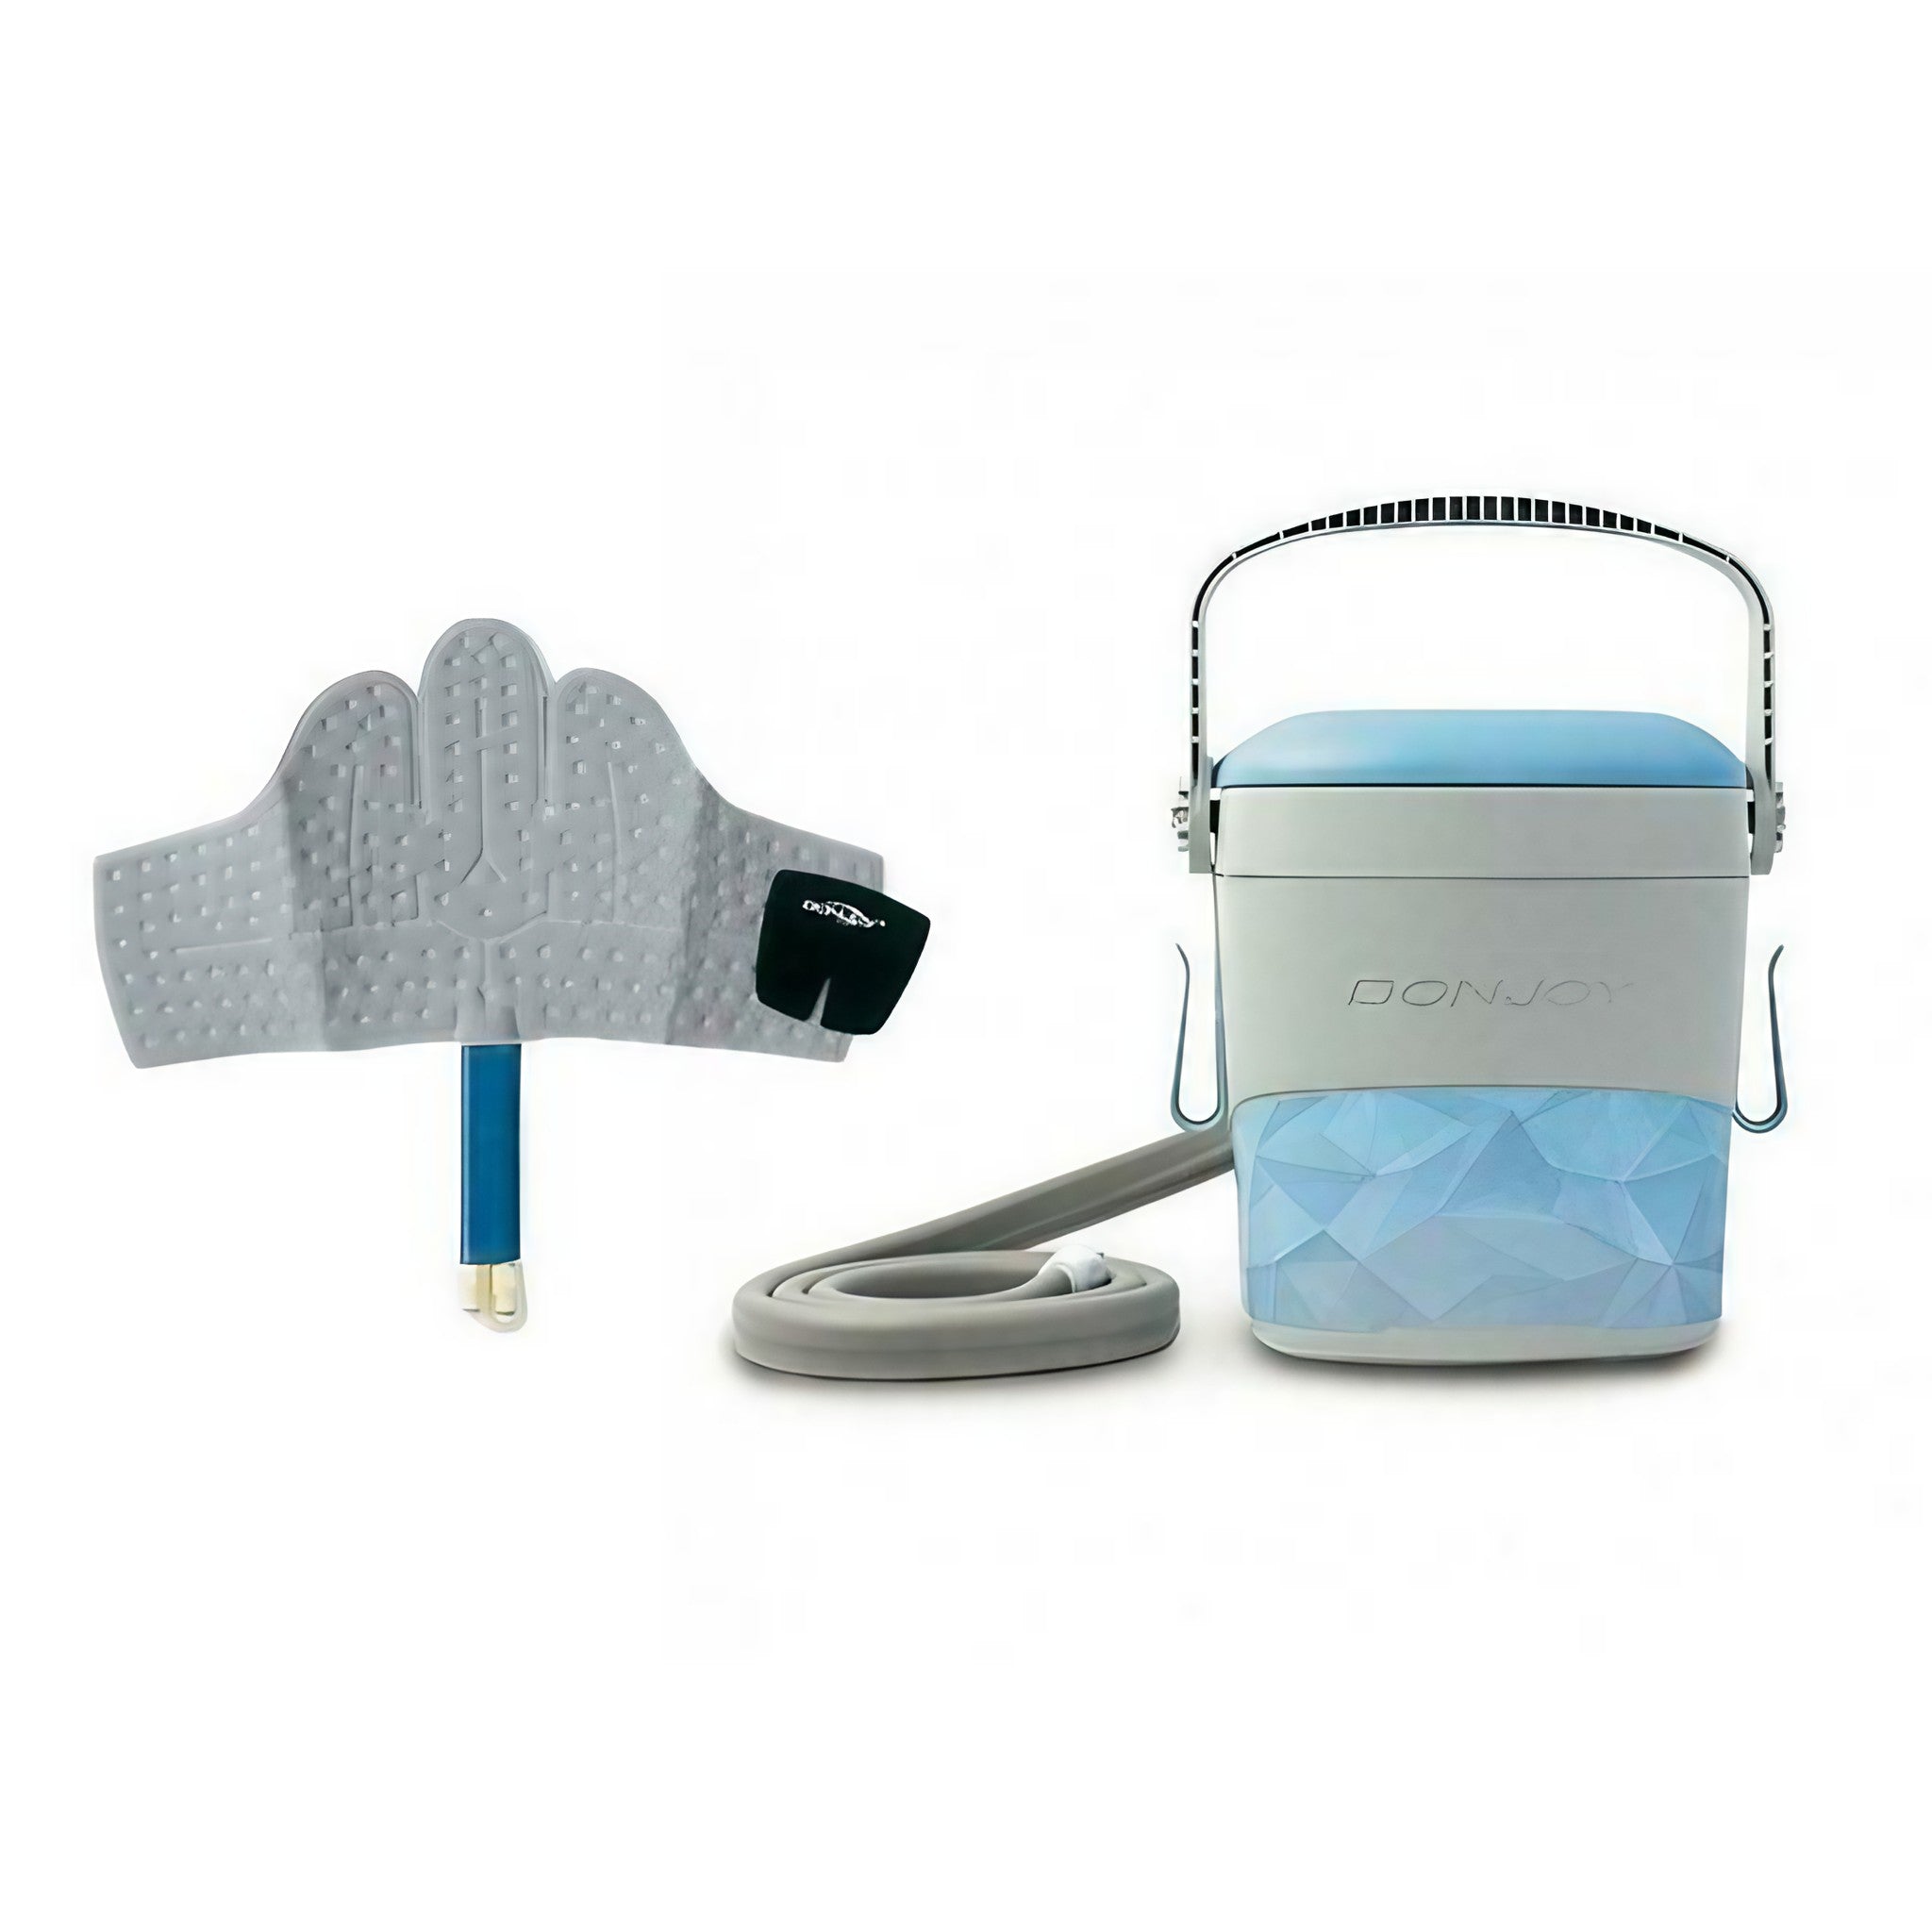 DonJoy - Donjoy Iceman Classic3 Cold Therapy Unit - SourceColdTherapy